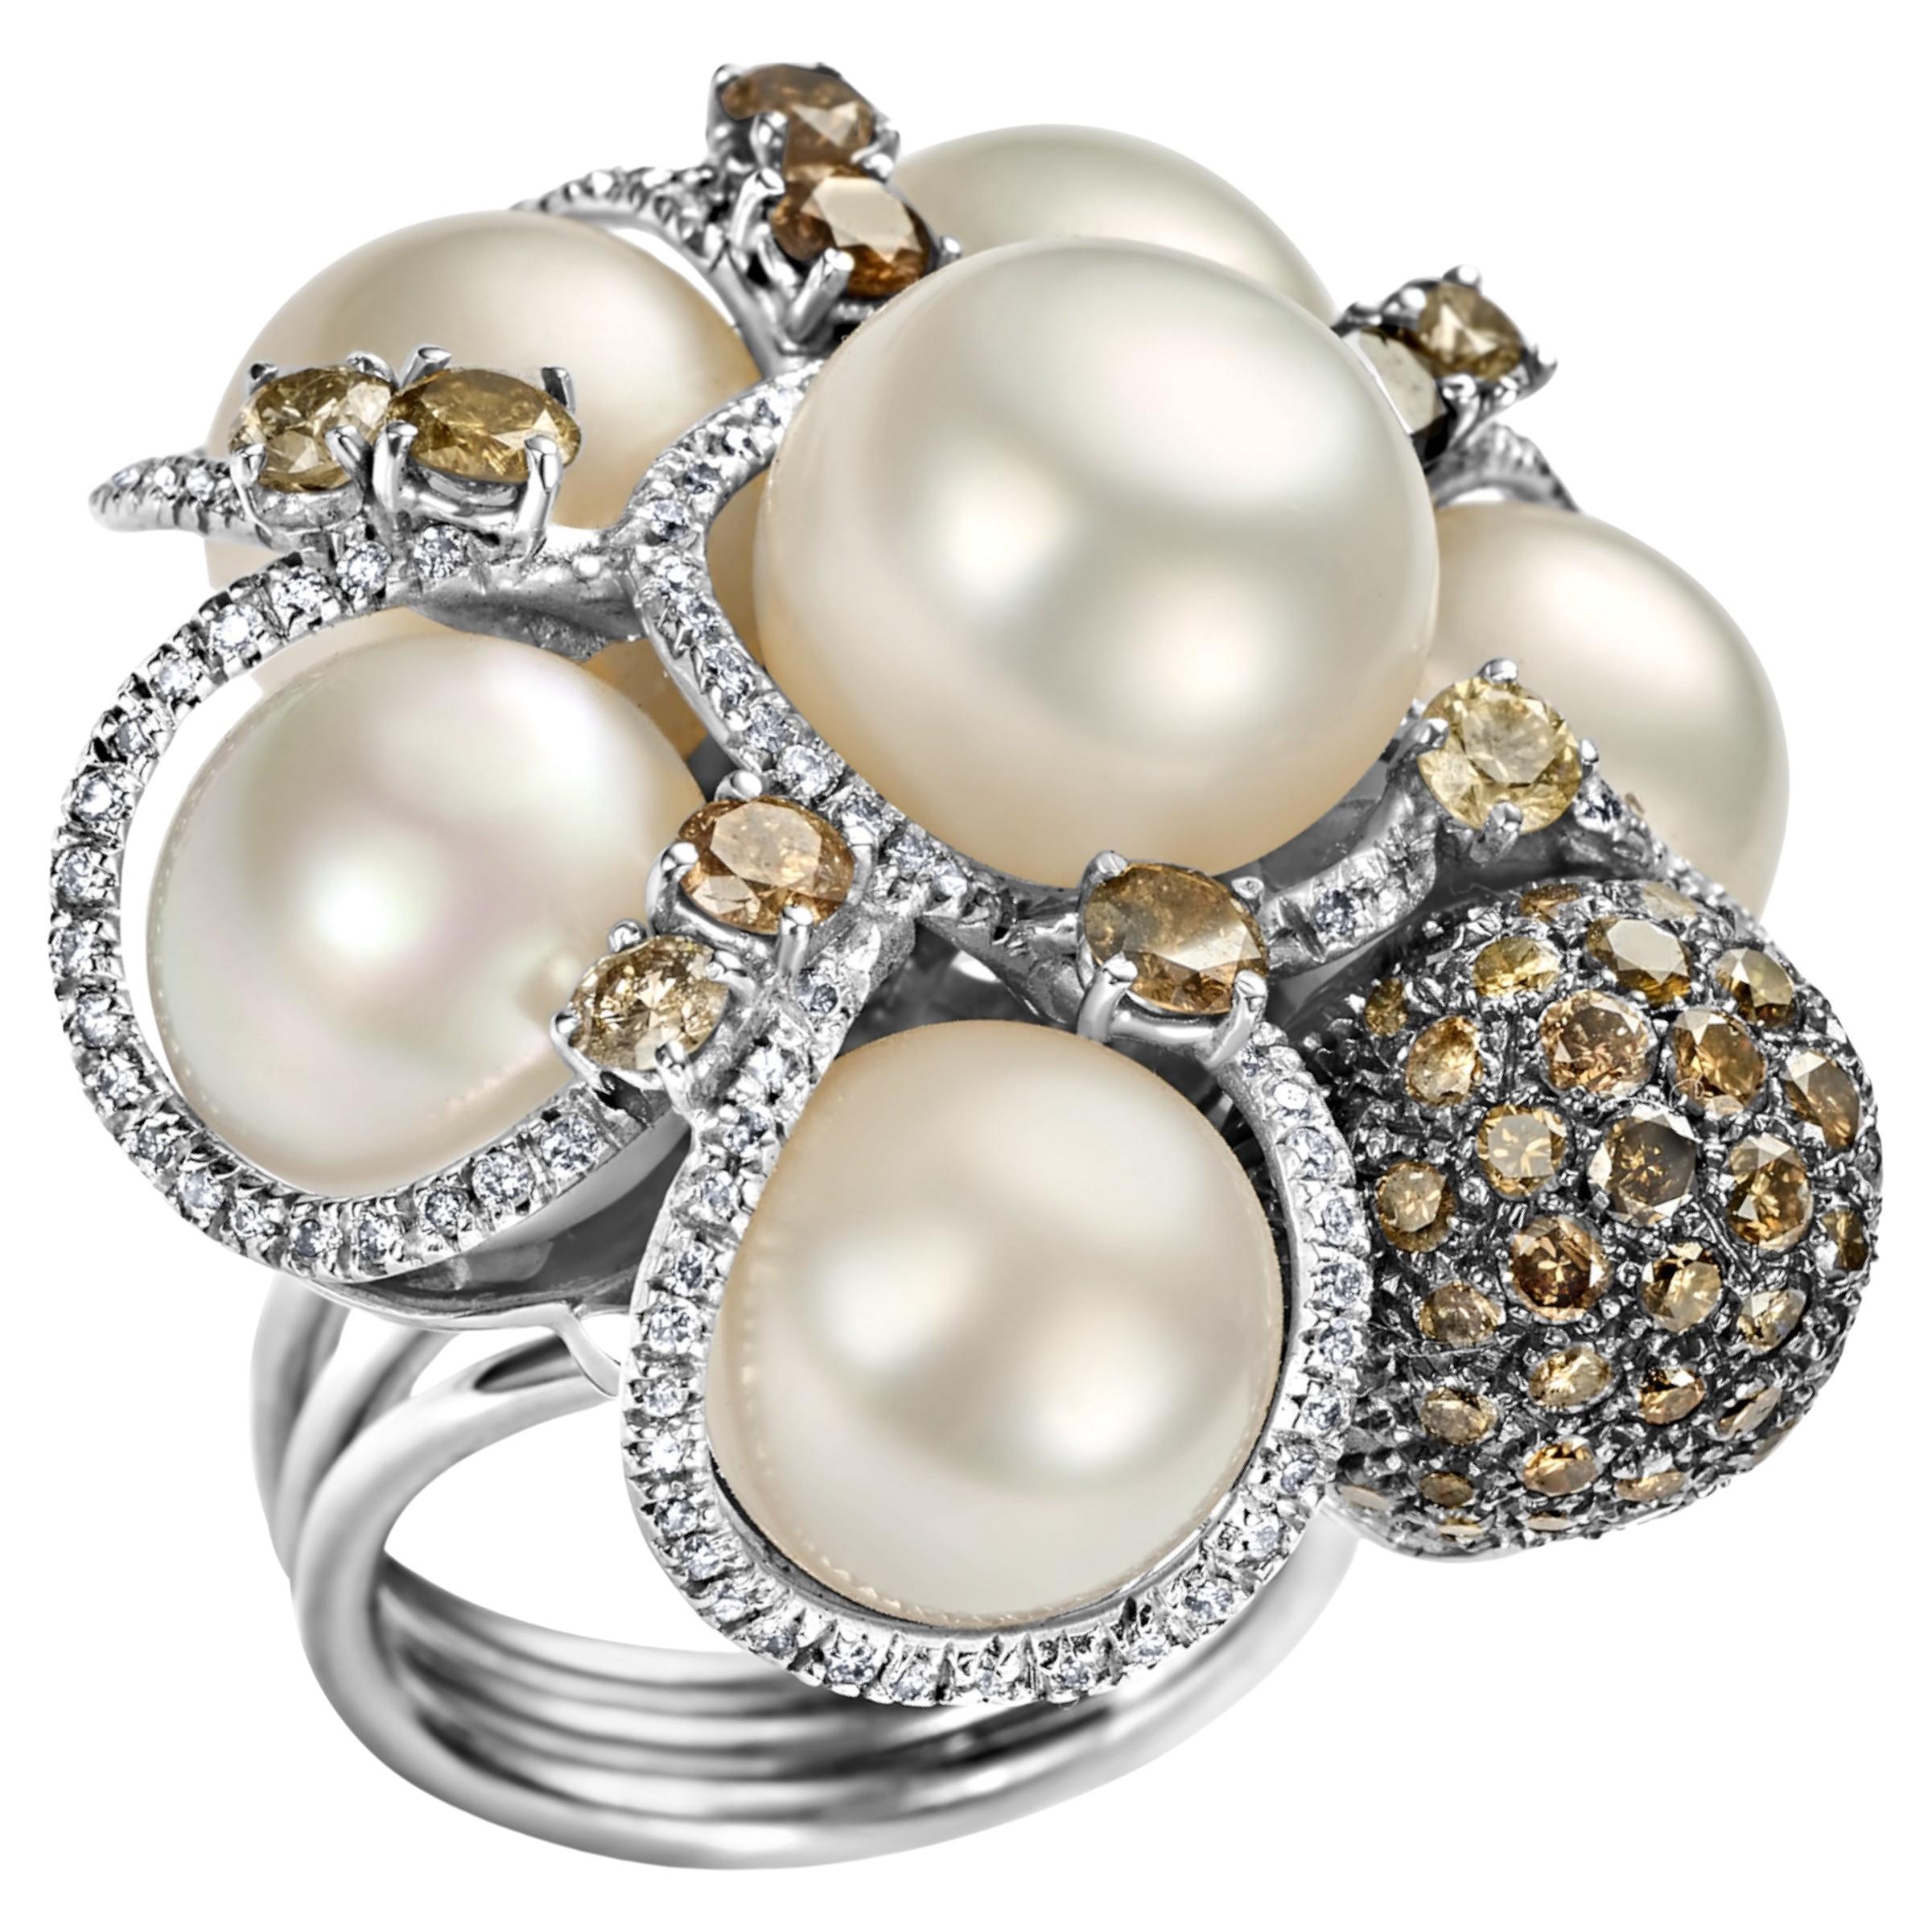 18kt White Gold Ring with 3.65ct Diamonds& Pearls, Can Purchase with Bracelet For Sale